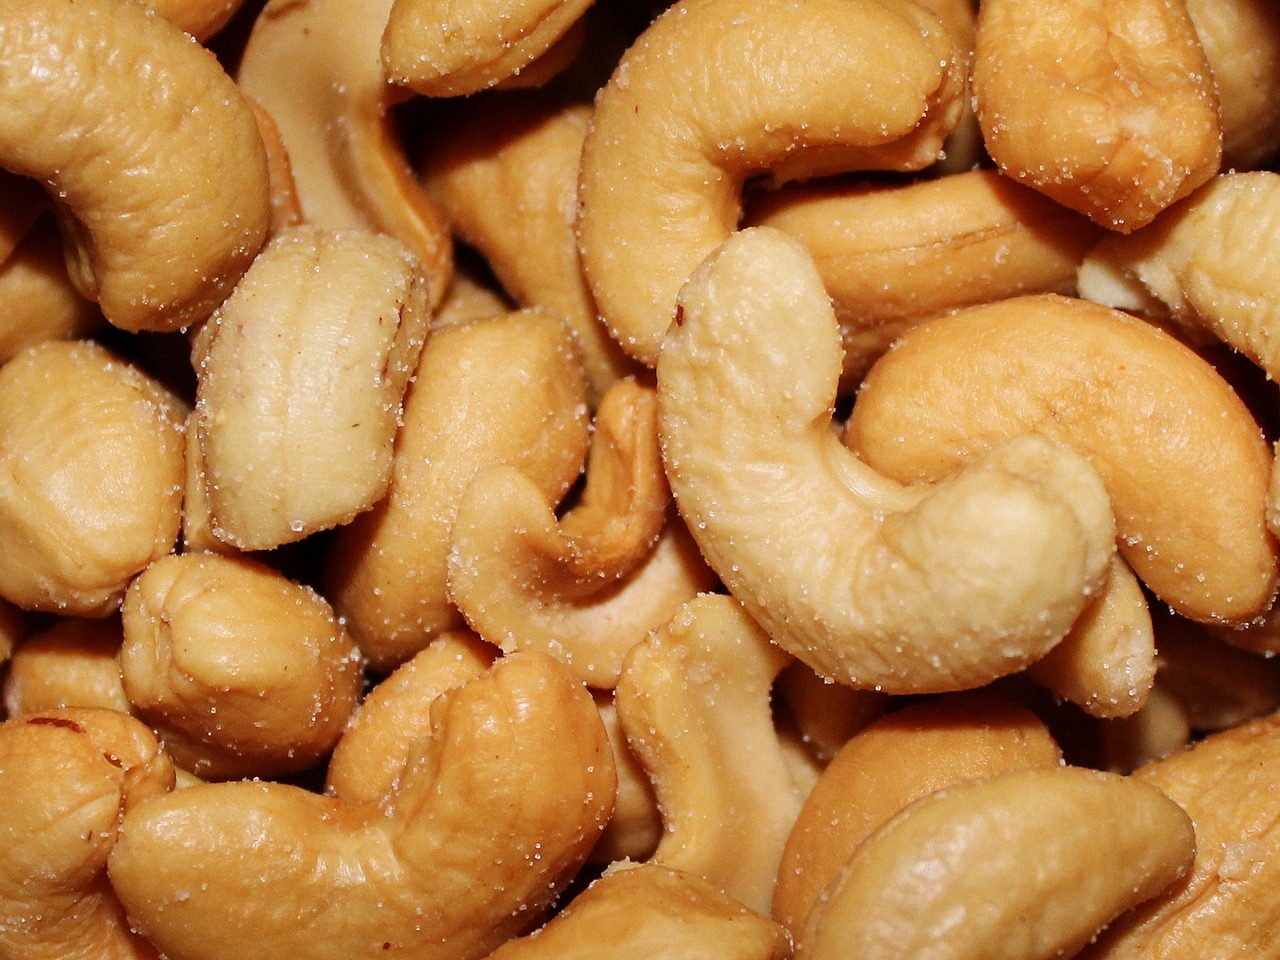 a pile of cashews sitting on top of each other, high quality product image”